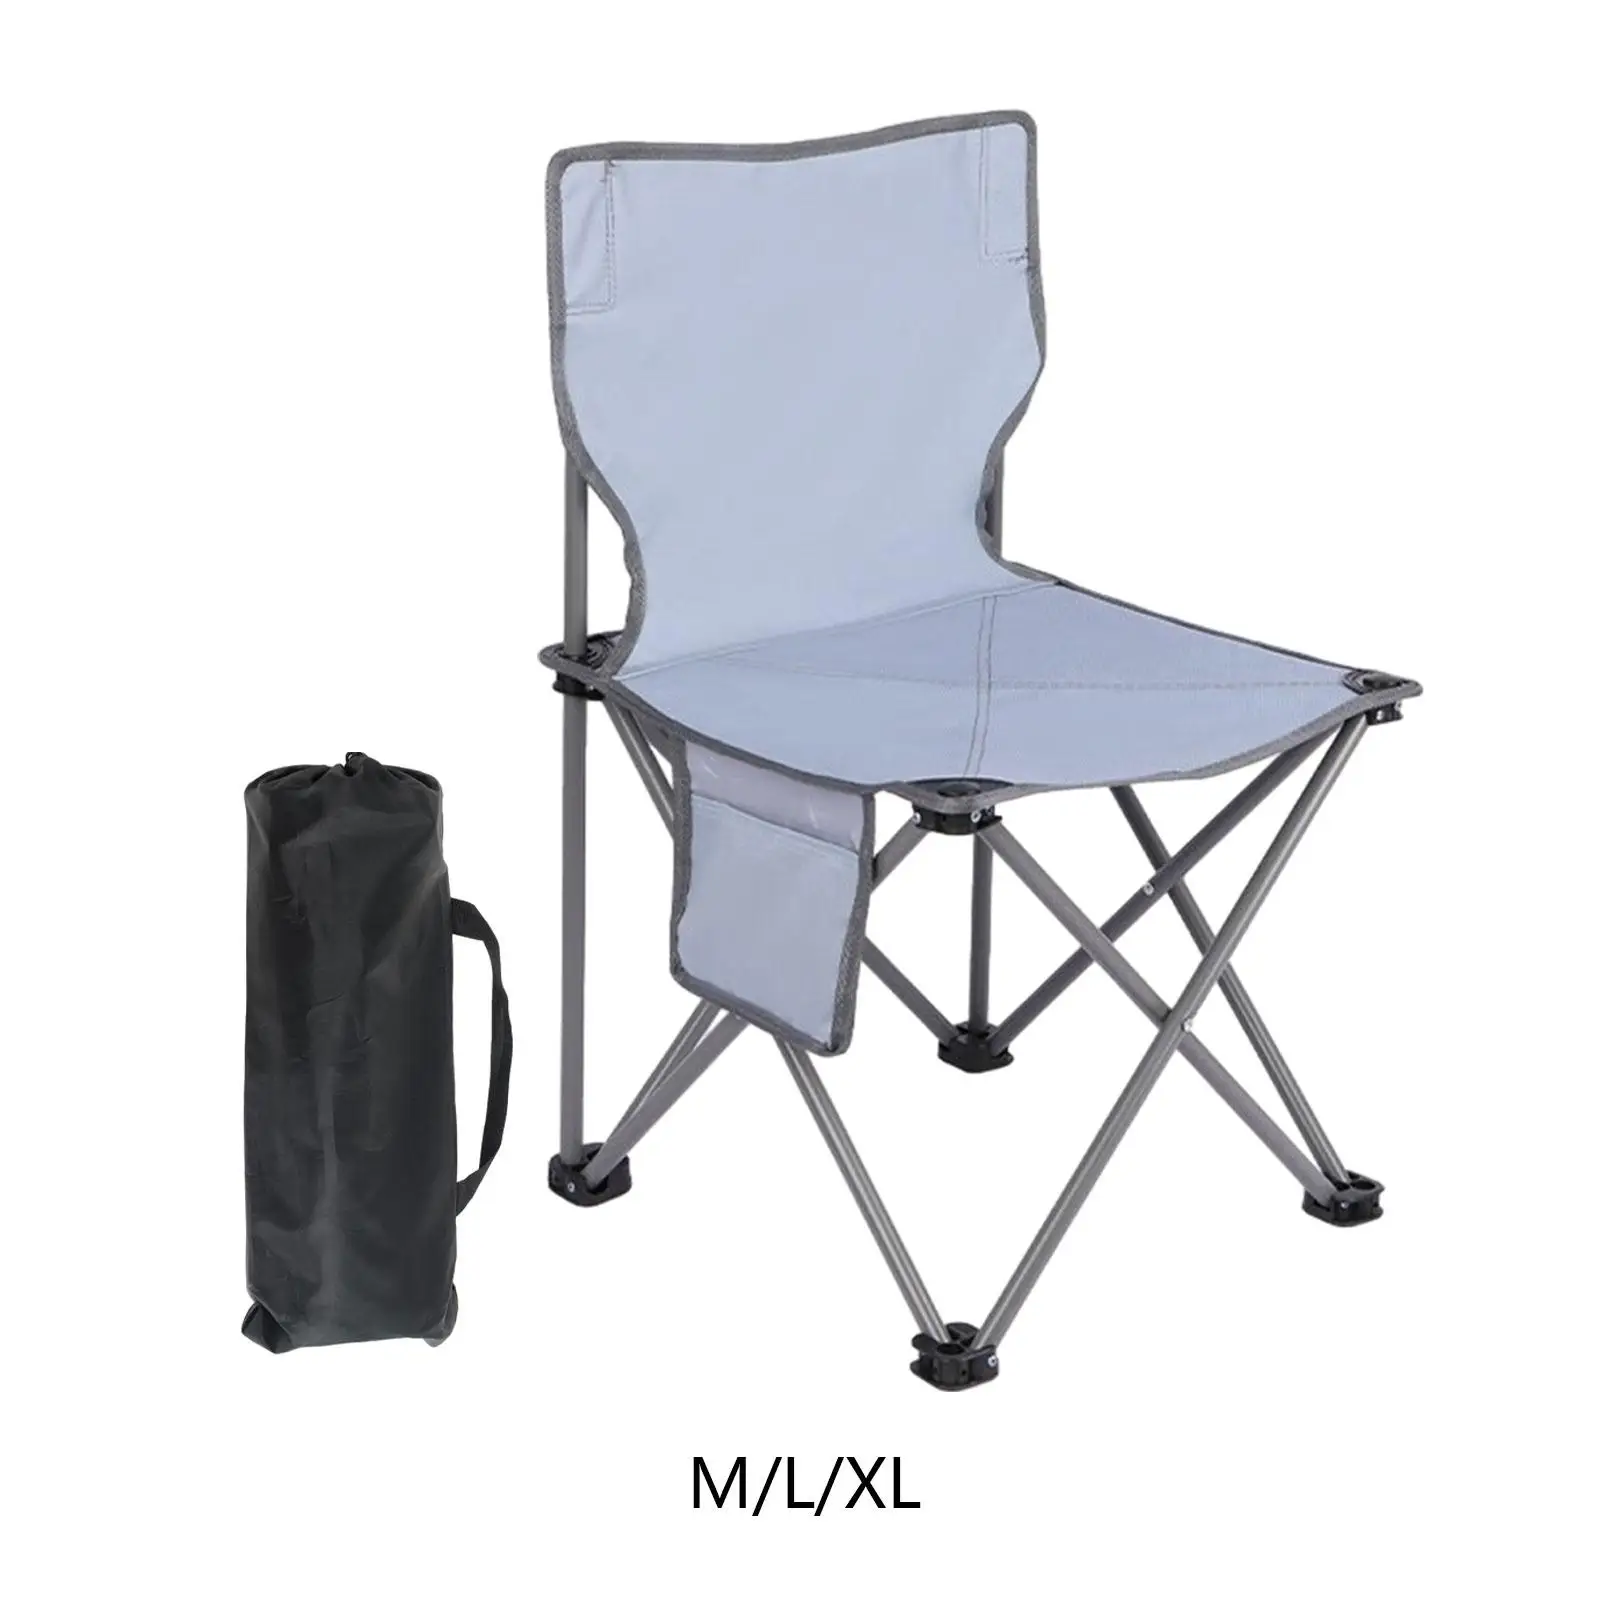 Portable Camping Chair for Heavy People Backrest Chair Lightweight Folding Chair for Outside for Concert Patio Beach Hiking Lawn